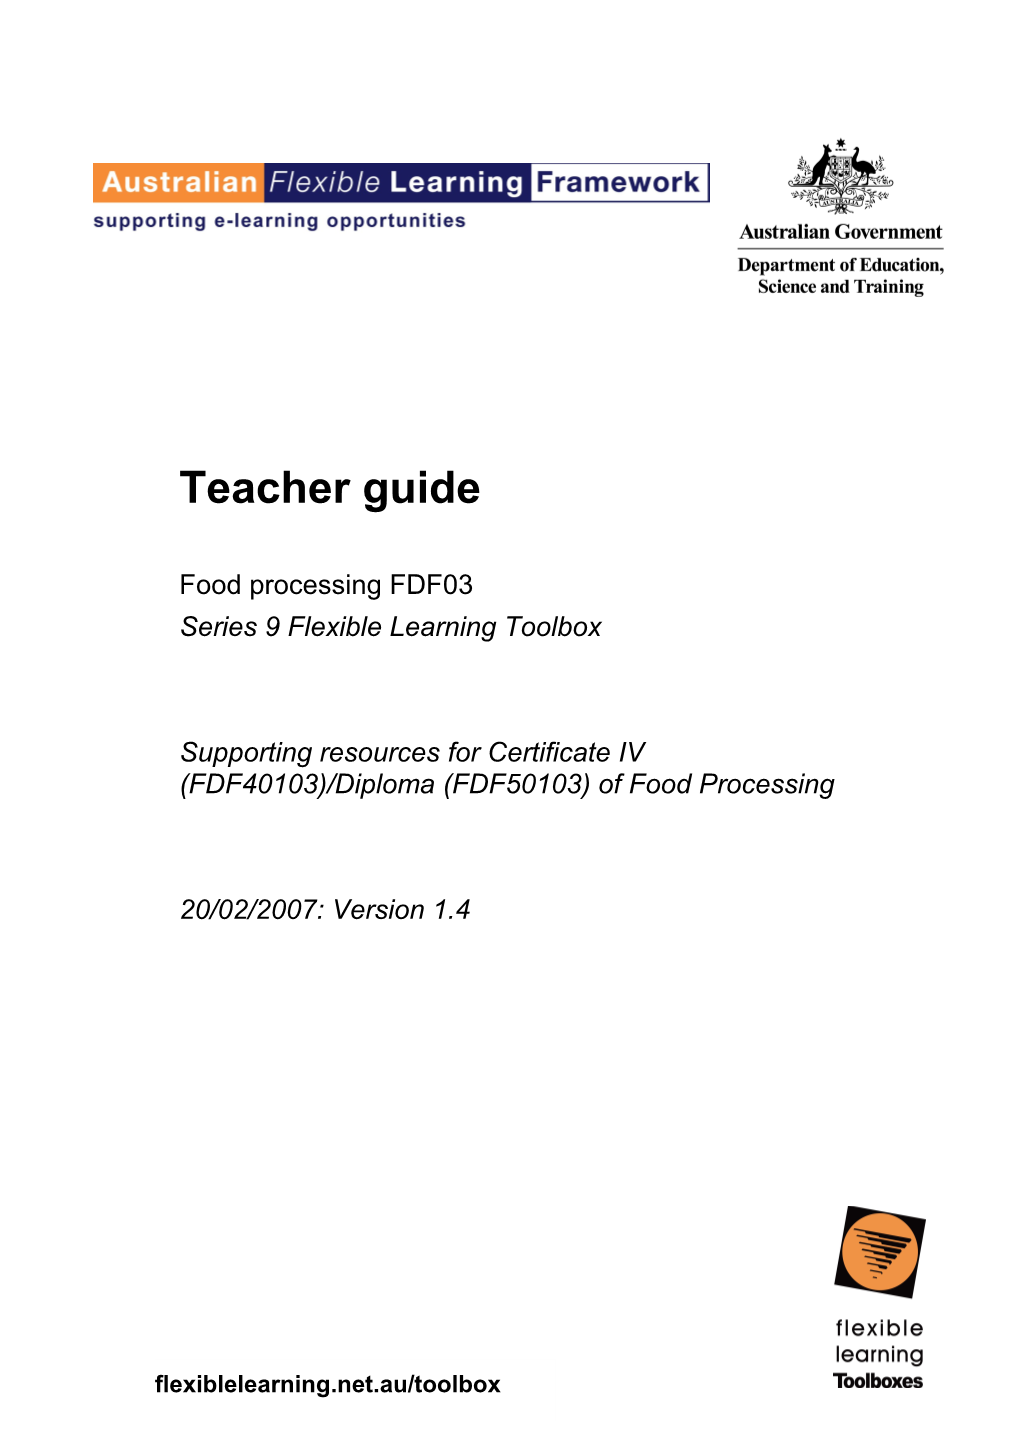 Food Safety Auditor Toolbox Teacher Guide